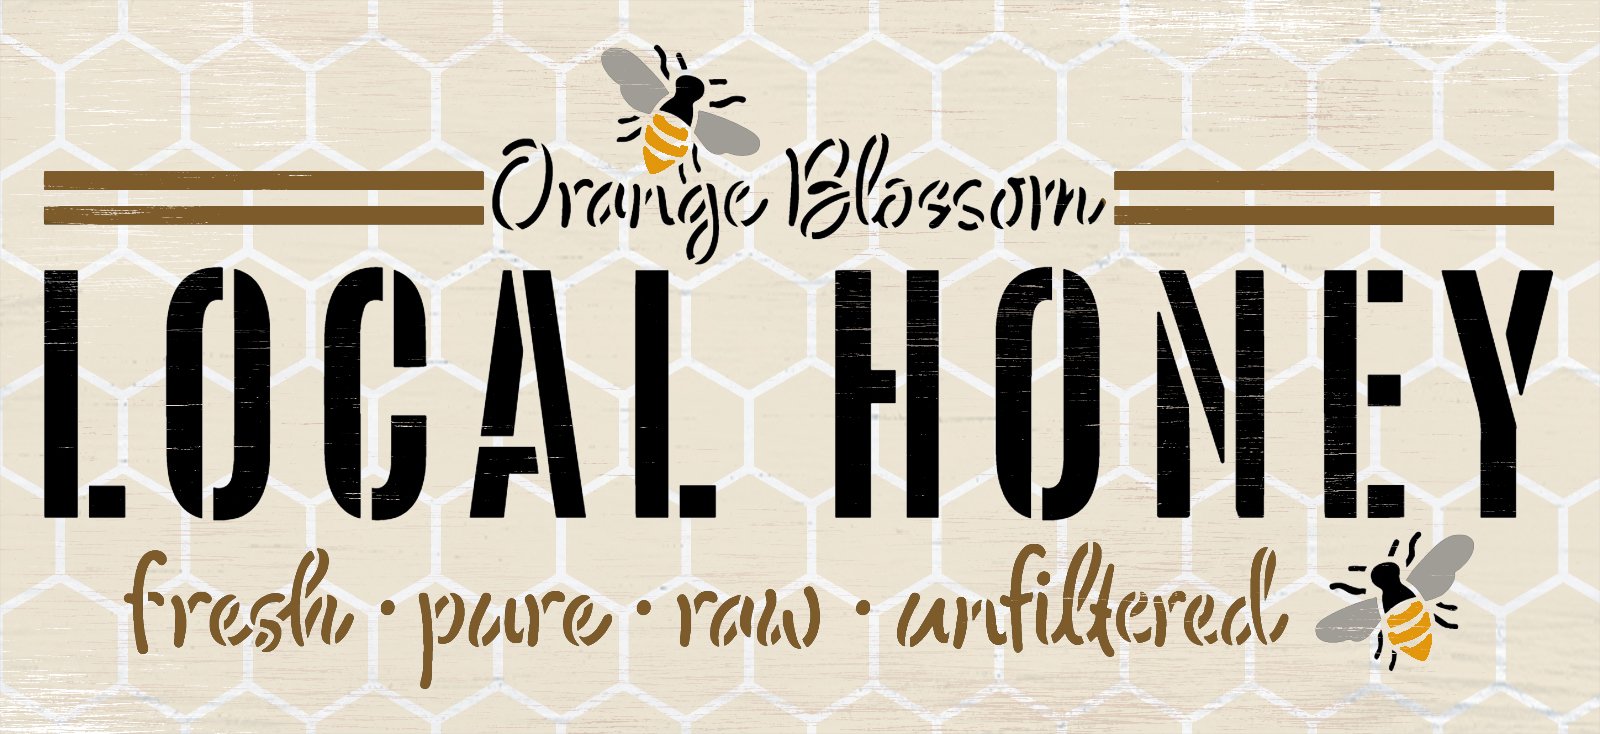 Orange Blossom Local Honey with Bee Stencil by StudioR12 | Beehive, Farmer's Market | Craft DIY Living Room Decor | Easy Painting Ideas | Select Size